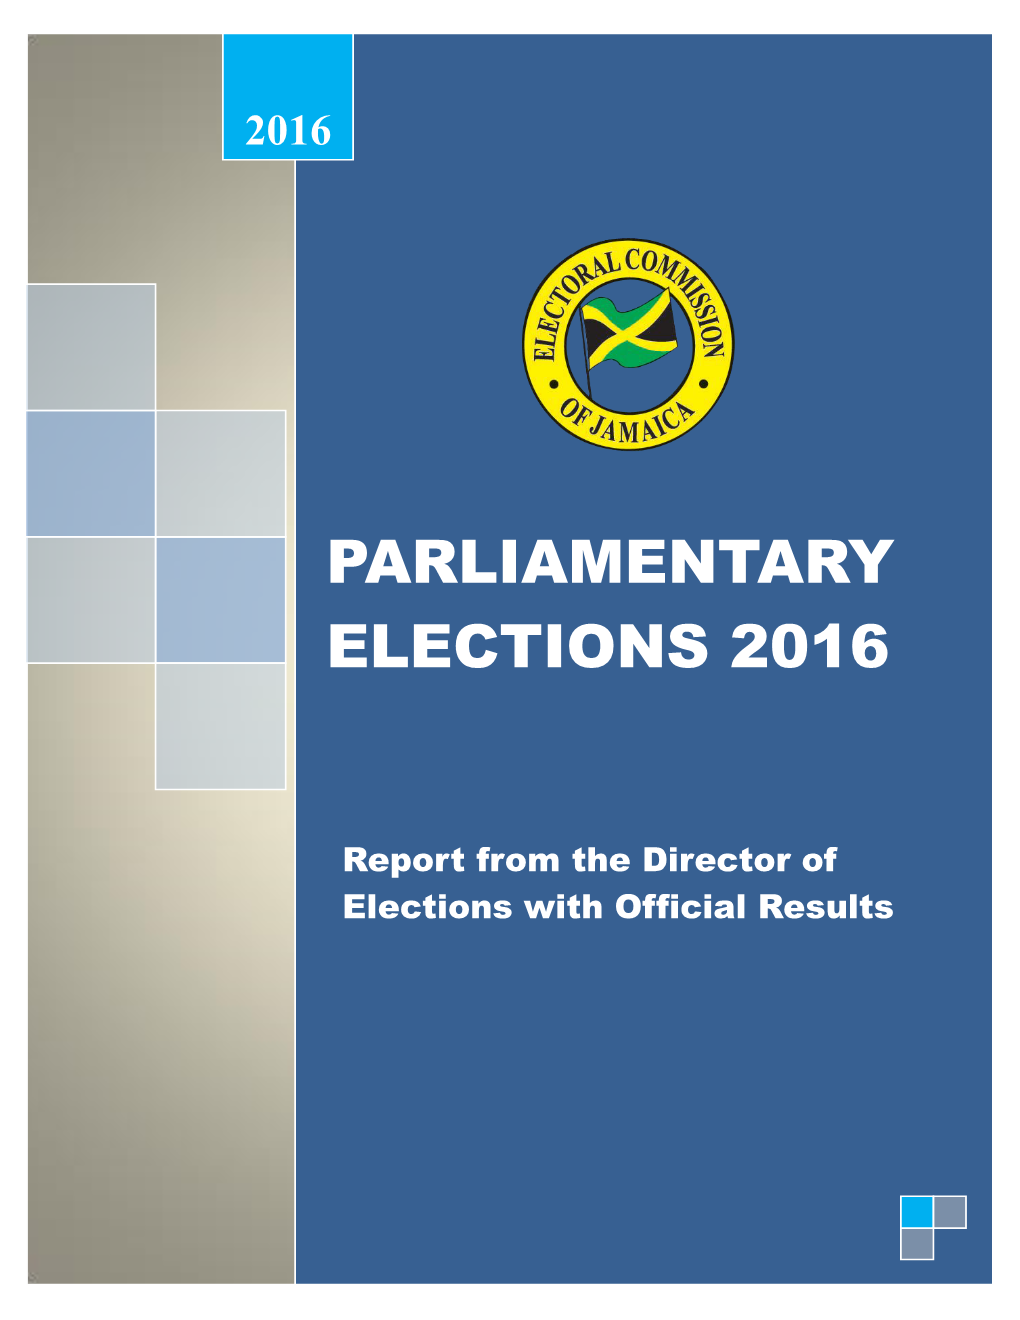 Parliamentary Elections 2016